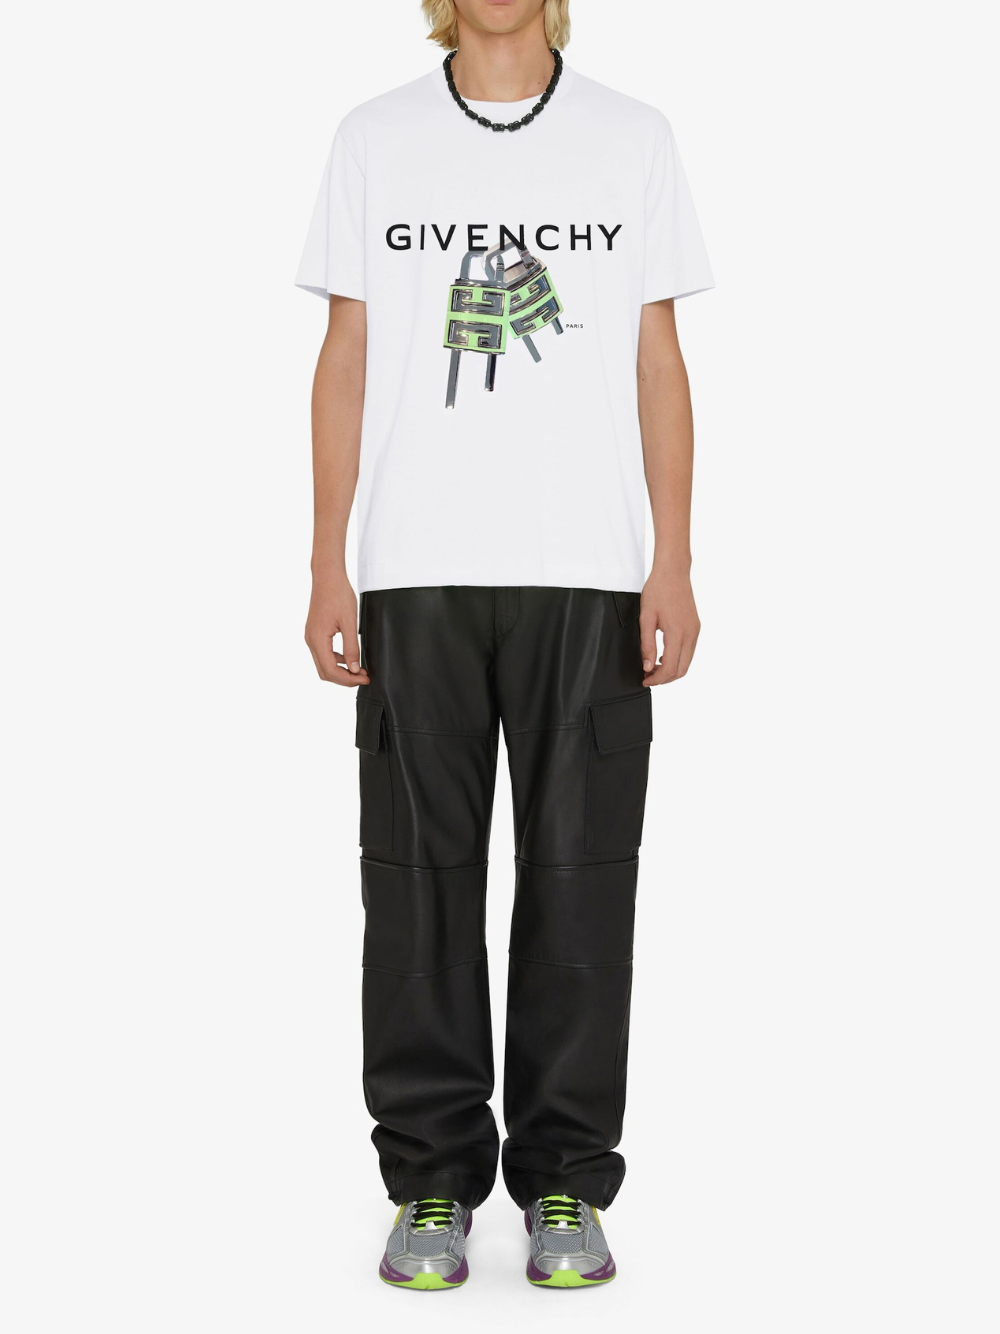 Givenchy 4G Lock T-Shirt White Slim Fit | Hype Vault Kuala Lumpur | Asia's Top Trusted High-End Sneakers and Streetwear Store | Guaranteed 100% authentic